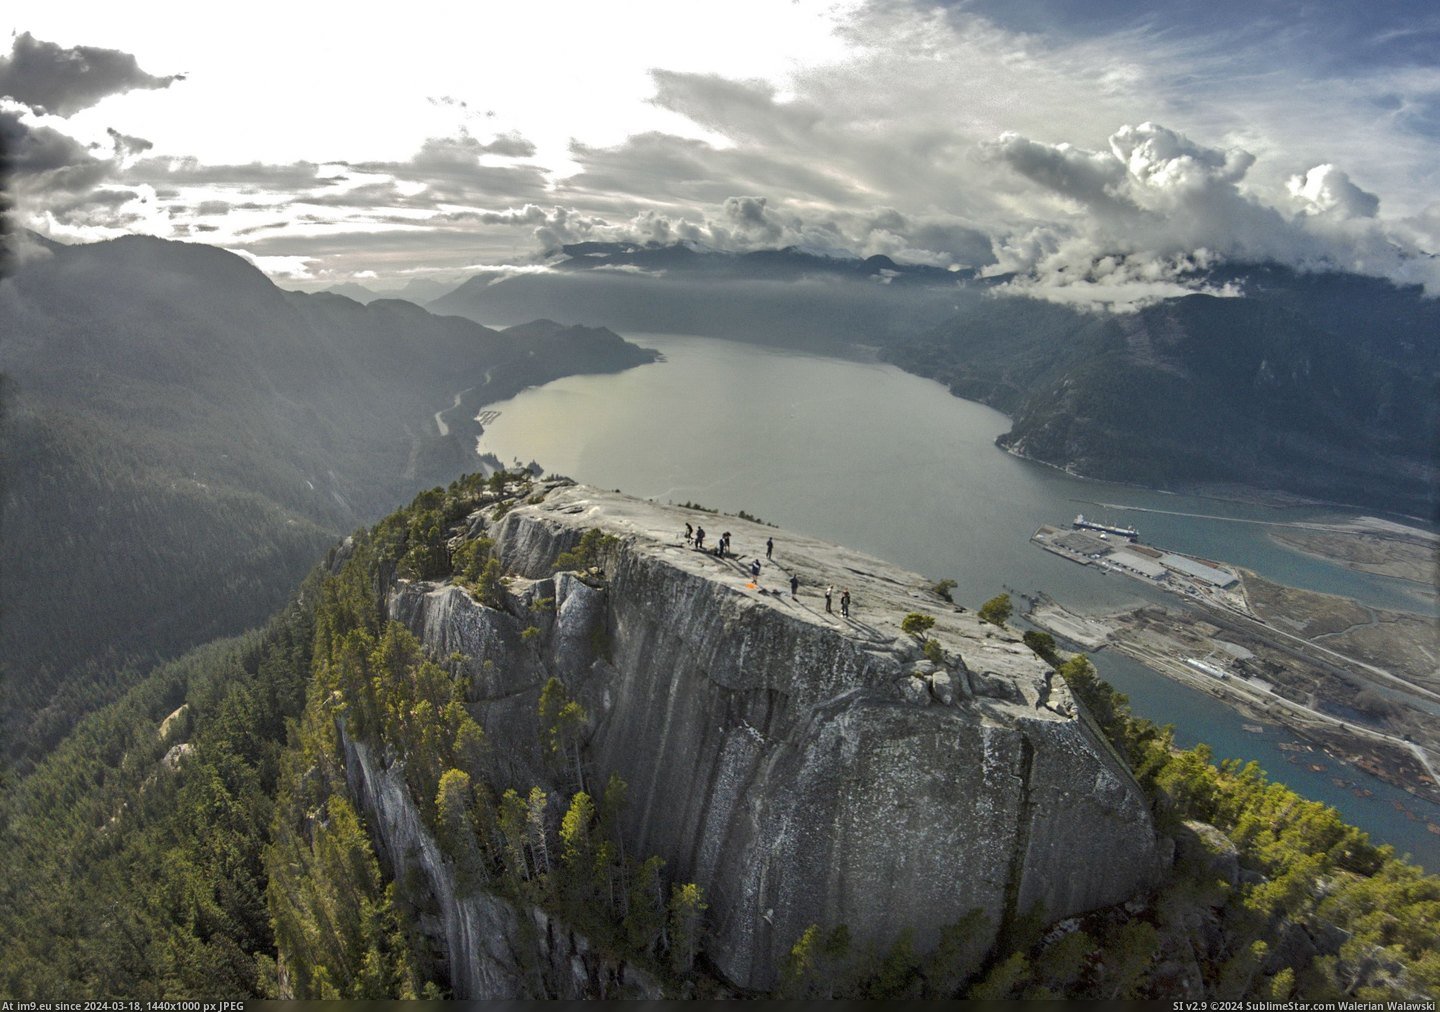 #British #Peak #Drone #Chief #Squamish #Columbia #Photographed [Earthporn]  Stawamus Chief, first peak, Squamish, British Columbia, photographed with a drone [2815x1966] Pic. (Image of album My r/EARTHPORN favs))